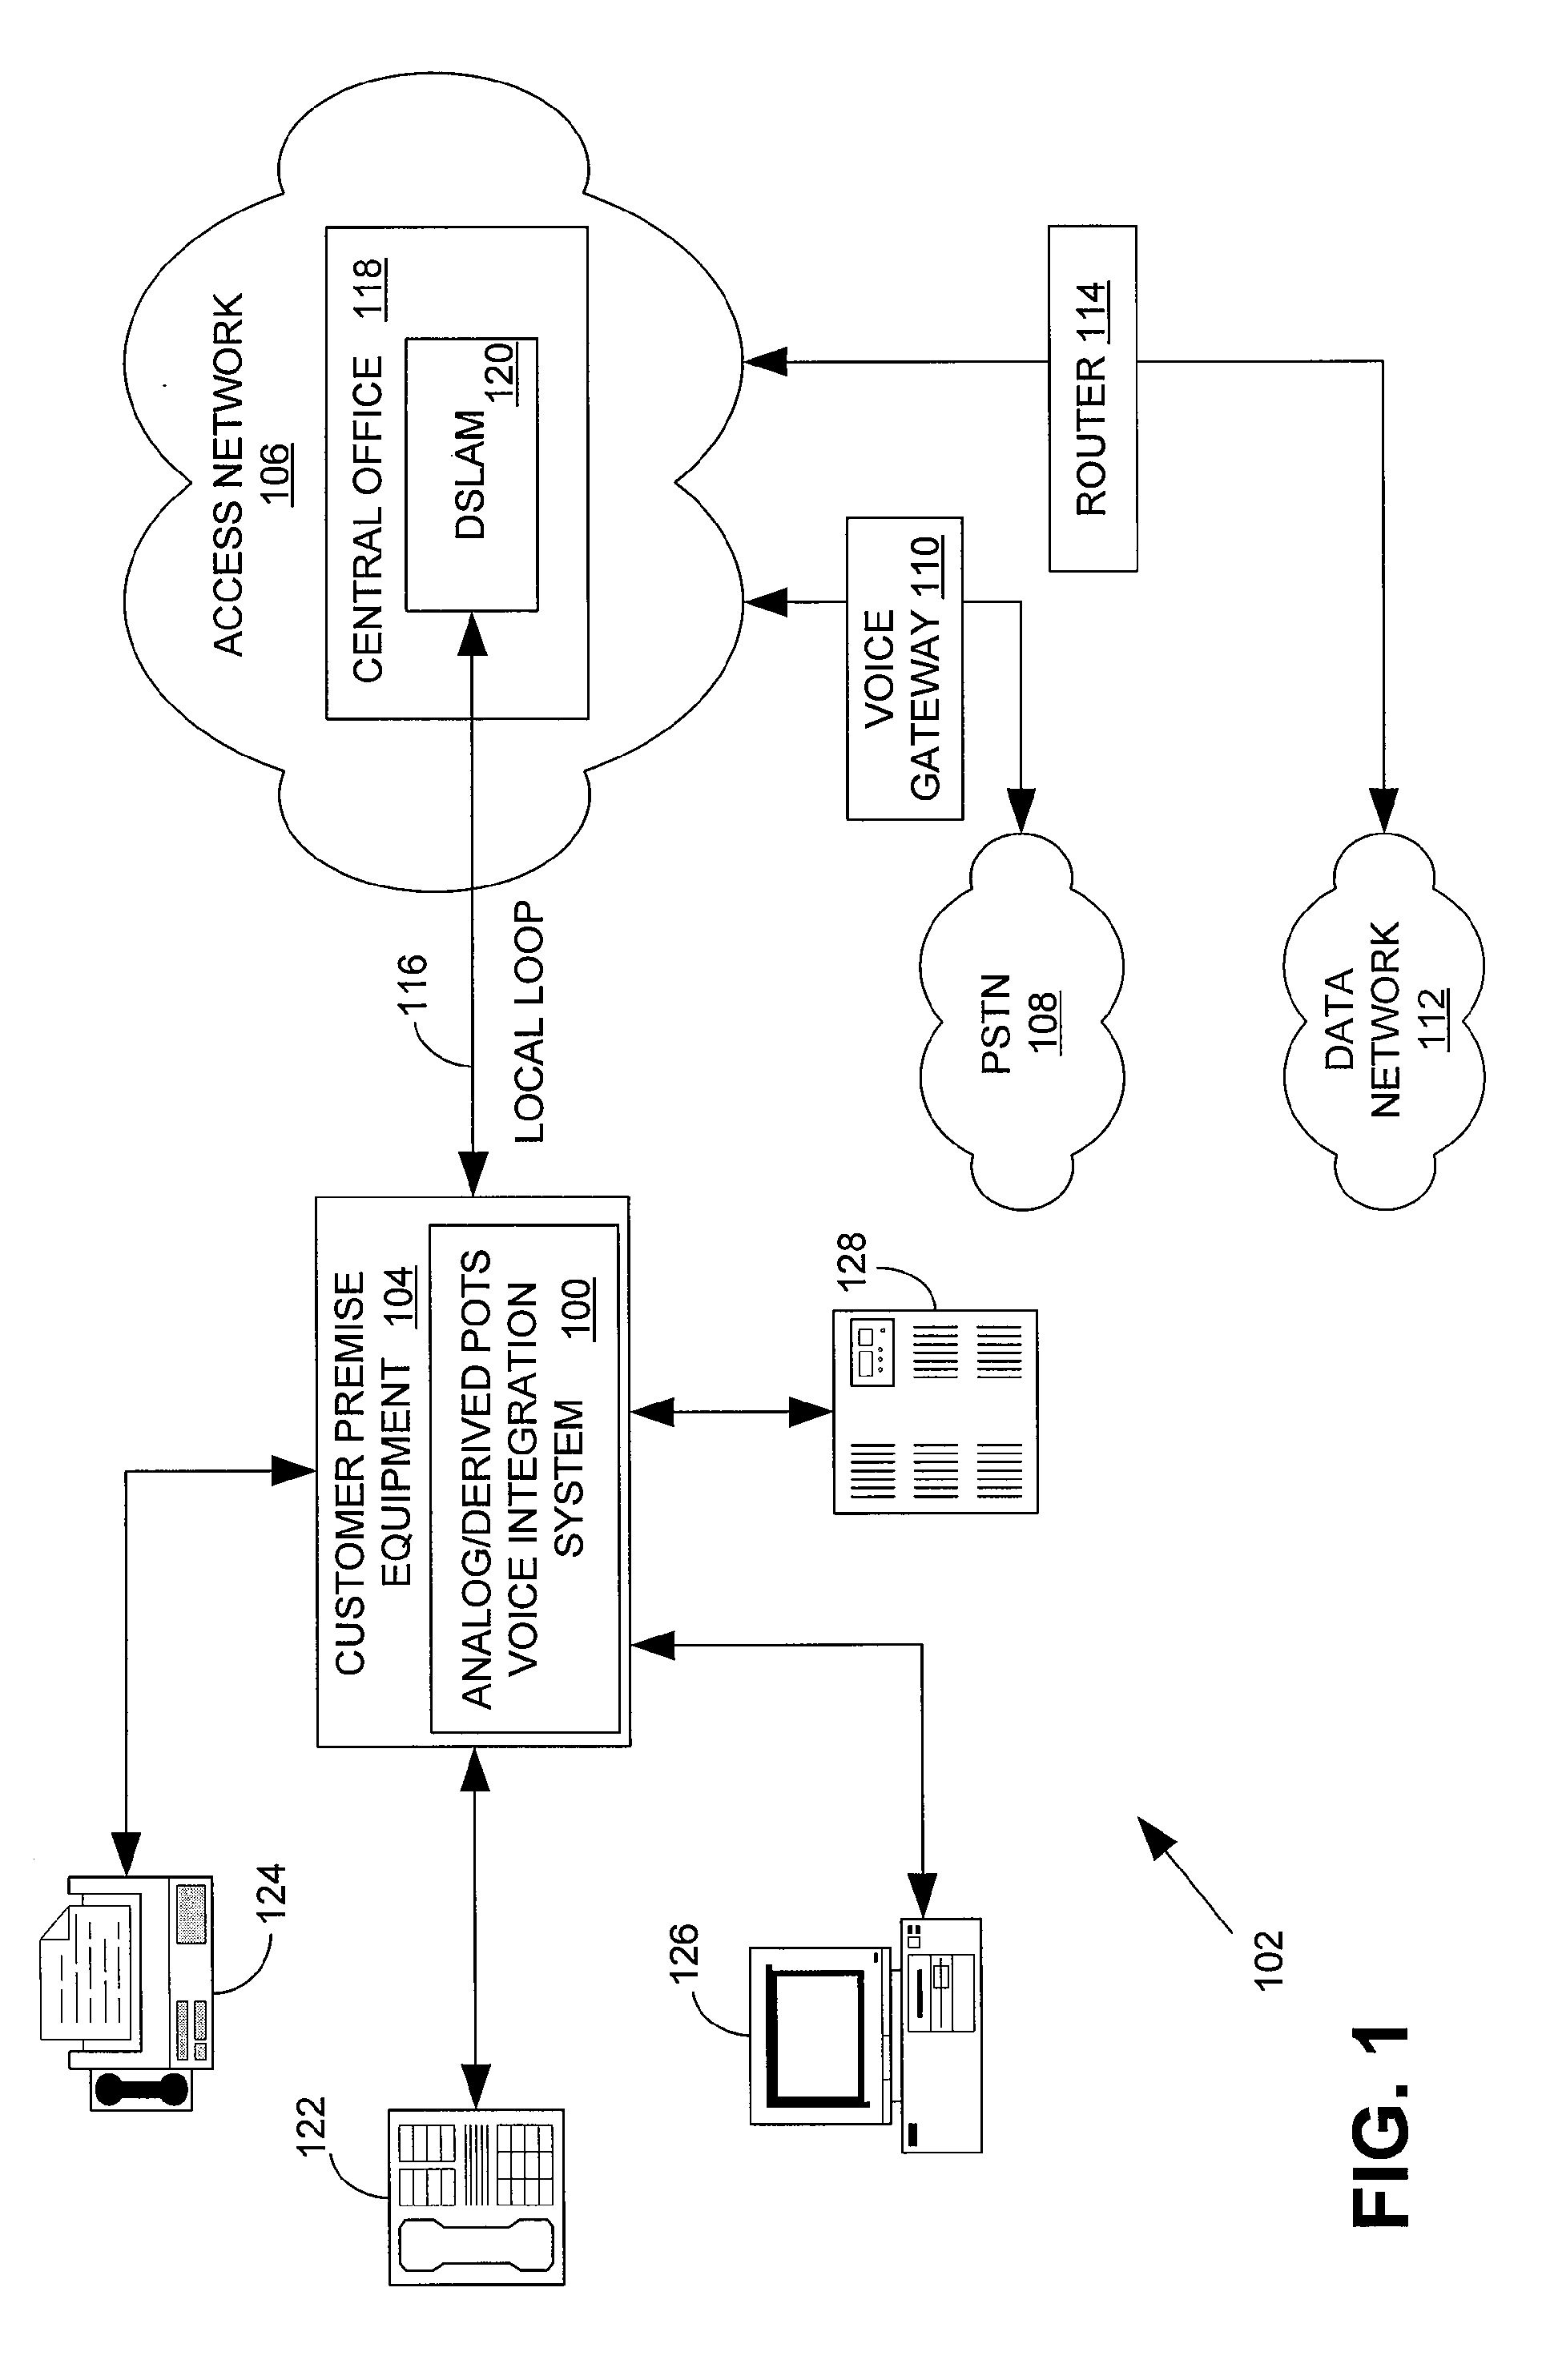 Systems and Methods for Integrating Analog Voice Service and Derived POTS Voice Service in a Digital Subscriber Line Environment